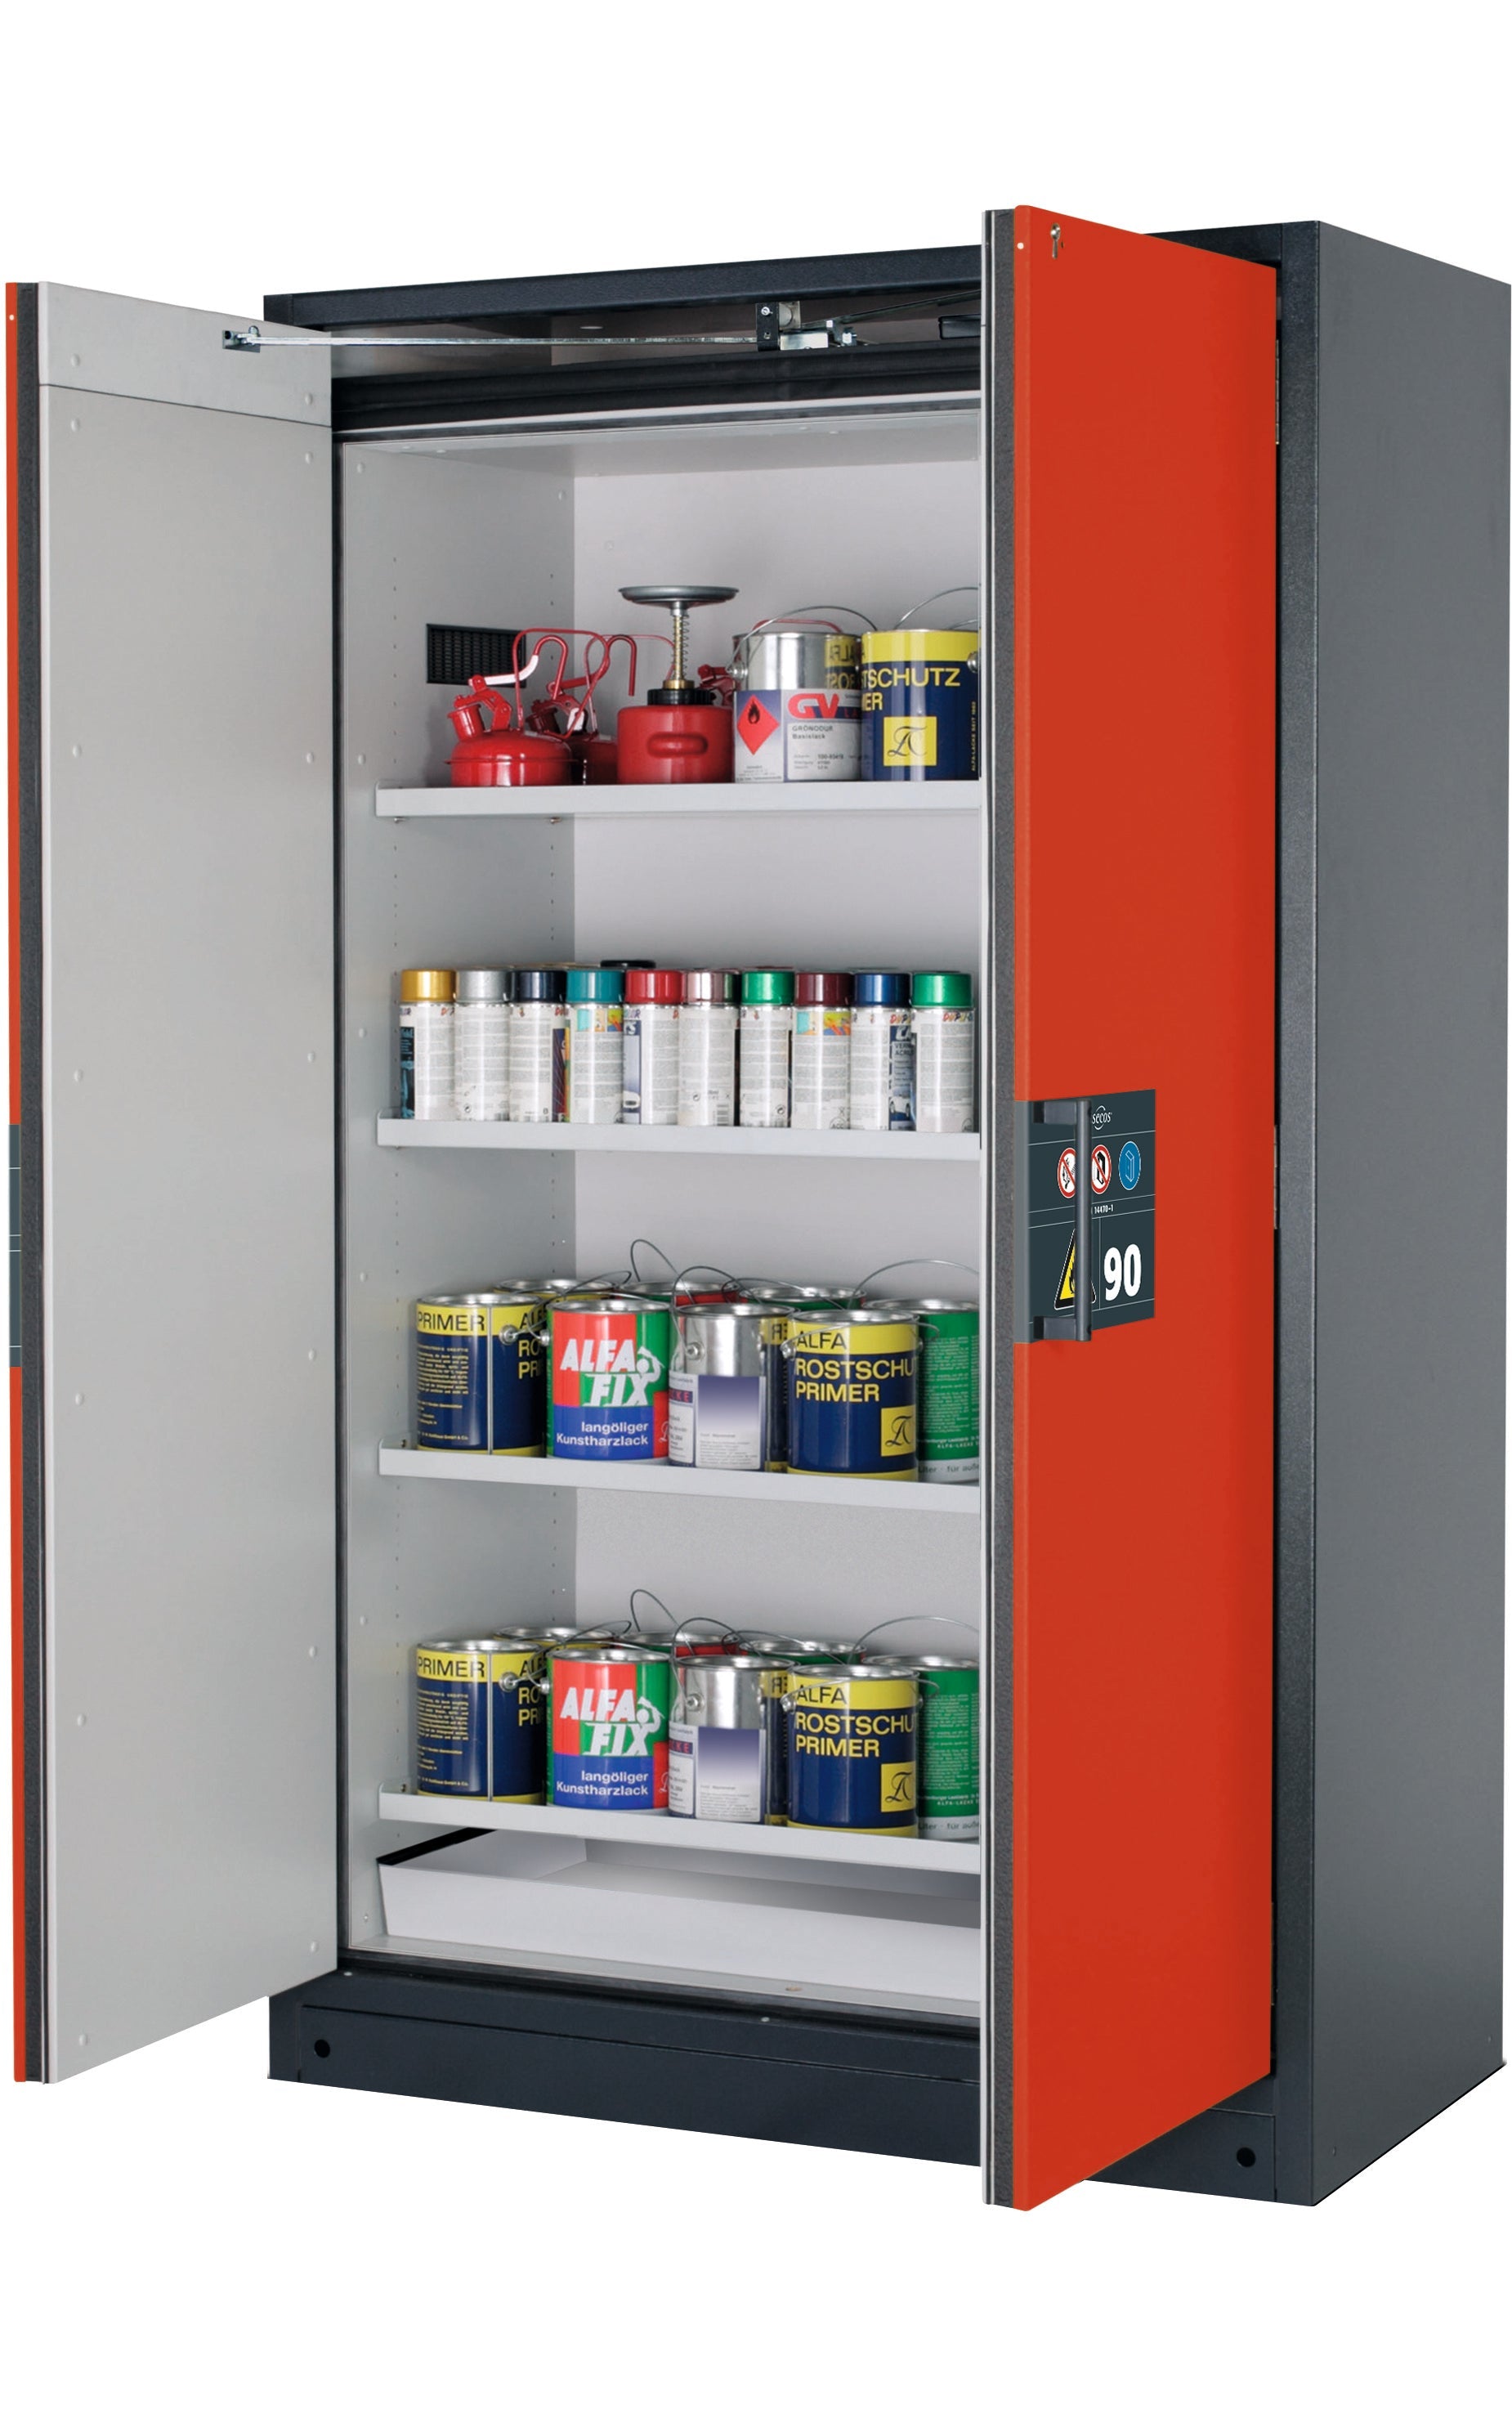 Type 90 safety storage cabinet Q-PEGASUS-90 model Q90.195.120.WDAC in traffic red RAL 3020 with 4x shelf standard (sheet steel),